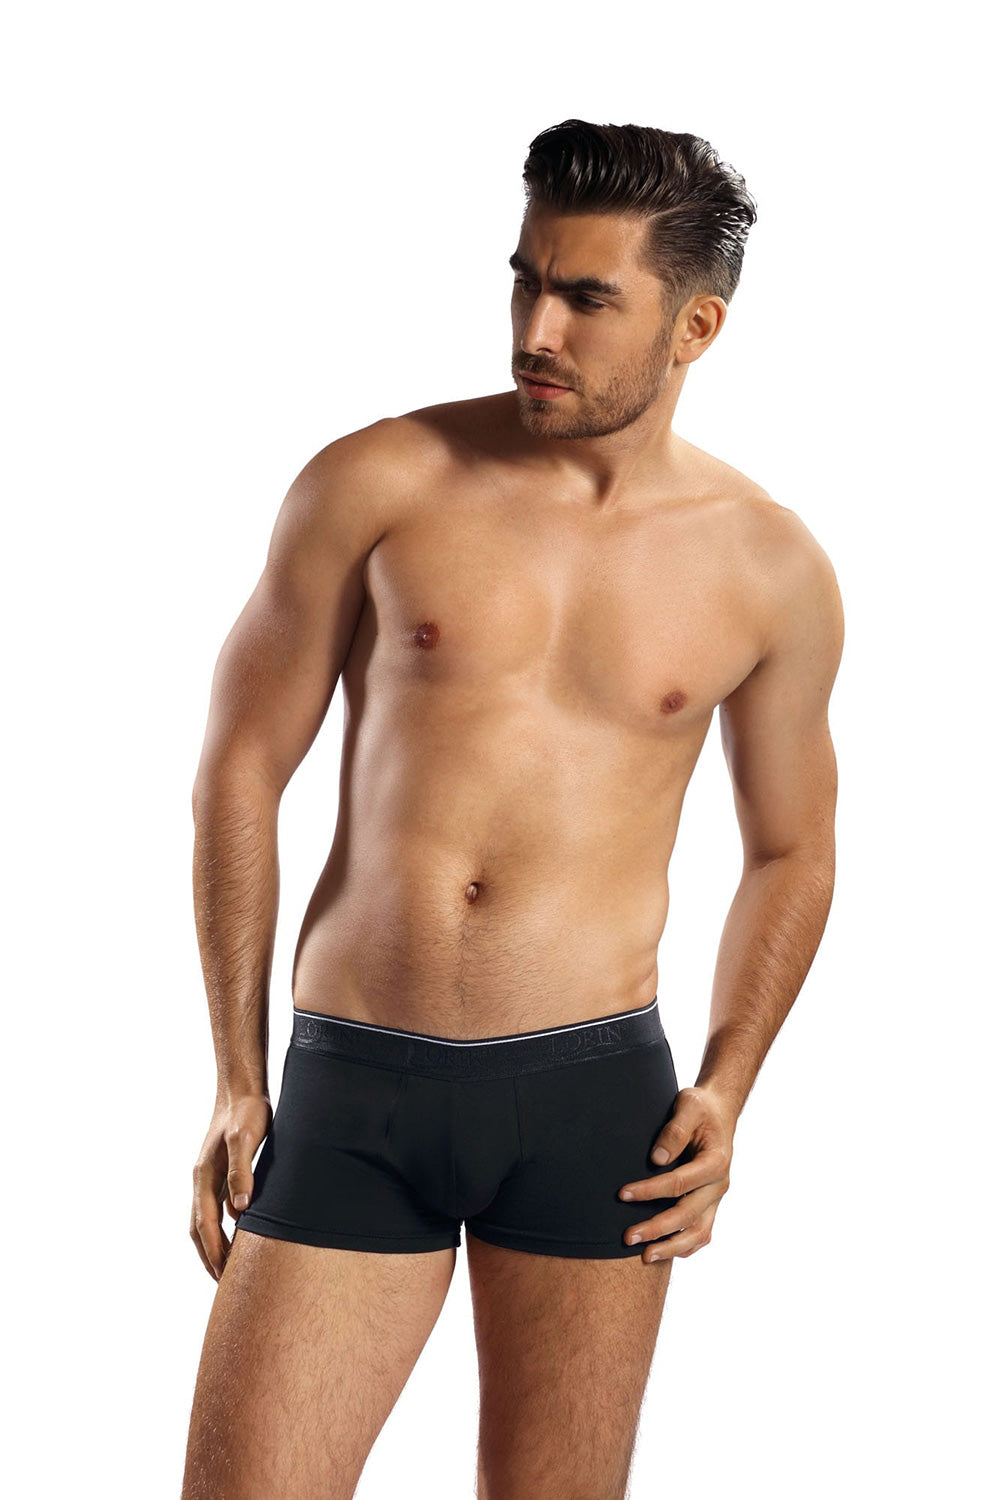 Boxers model 183507 Elsy Style Boxers Shorts, Slips, Swimming Briefs for Men